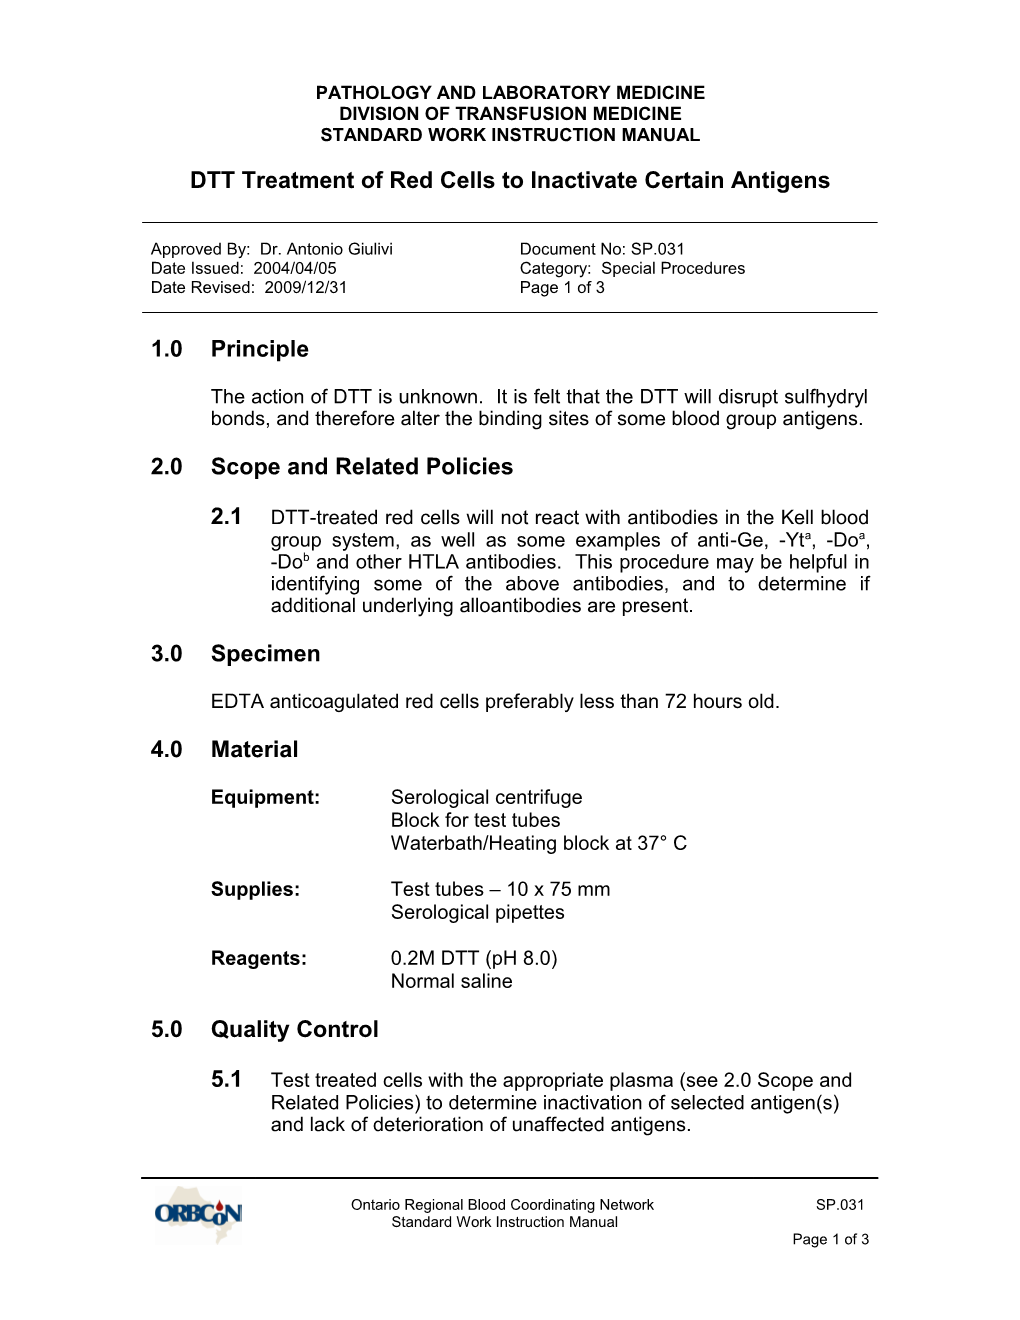 SP.031- DTT Treatment of Red Cells to Inactivate Certain Antigens